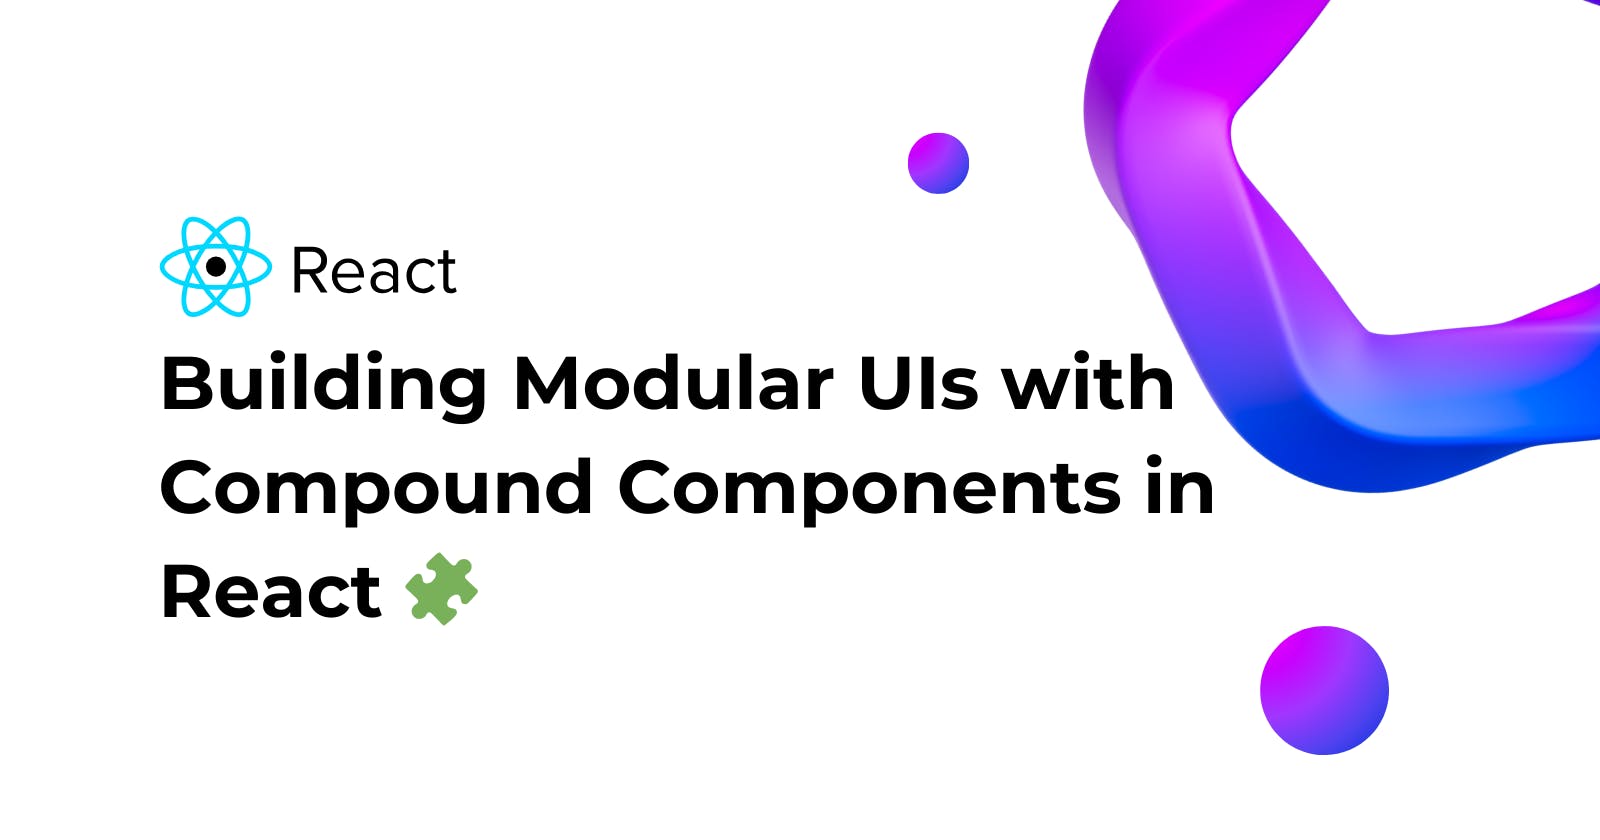 Modular UIs with Compound Components in React 🧩